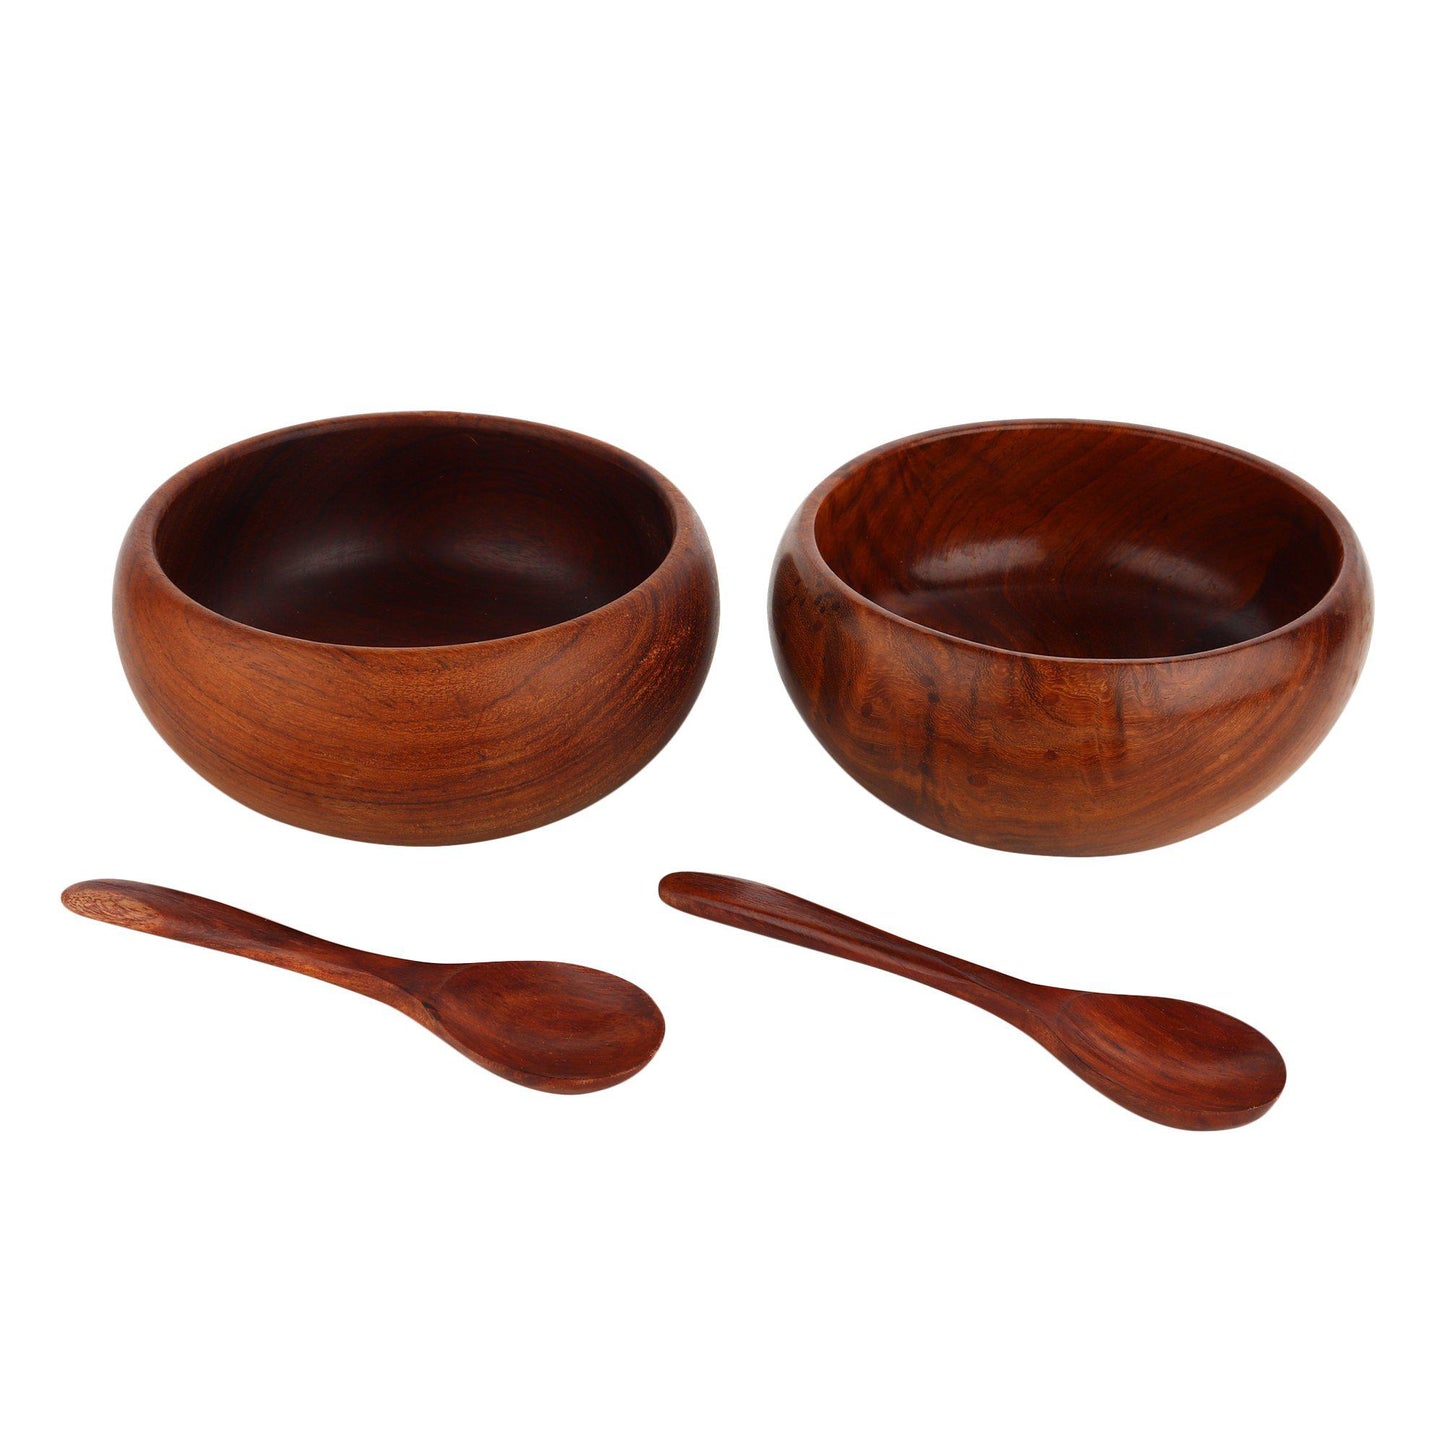 Wooden Storage Bowls with Spoon